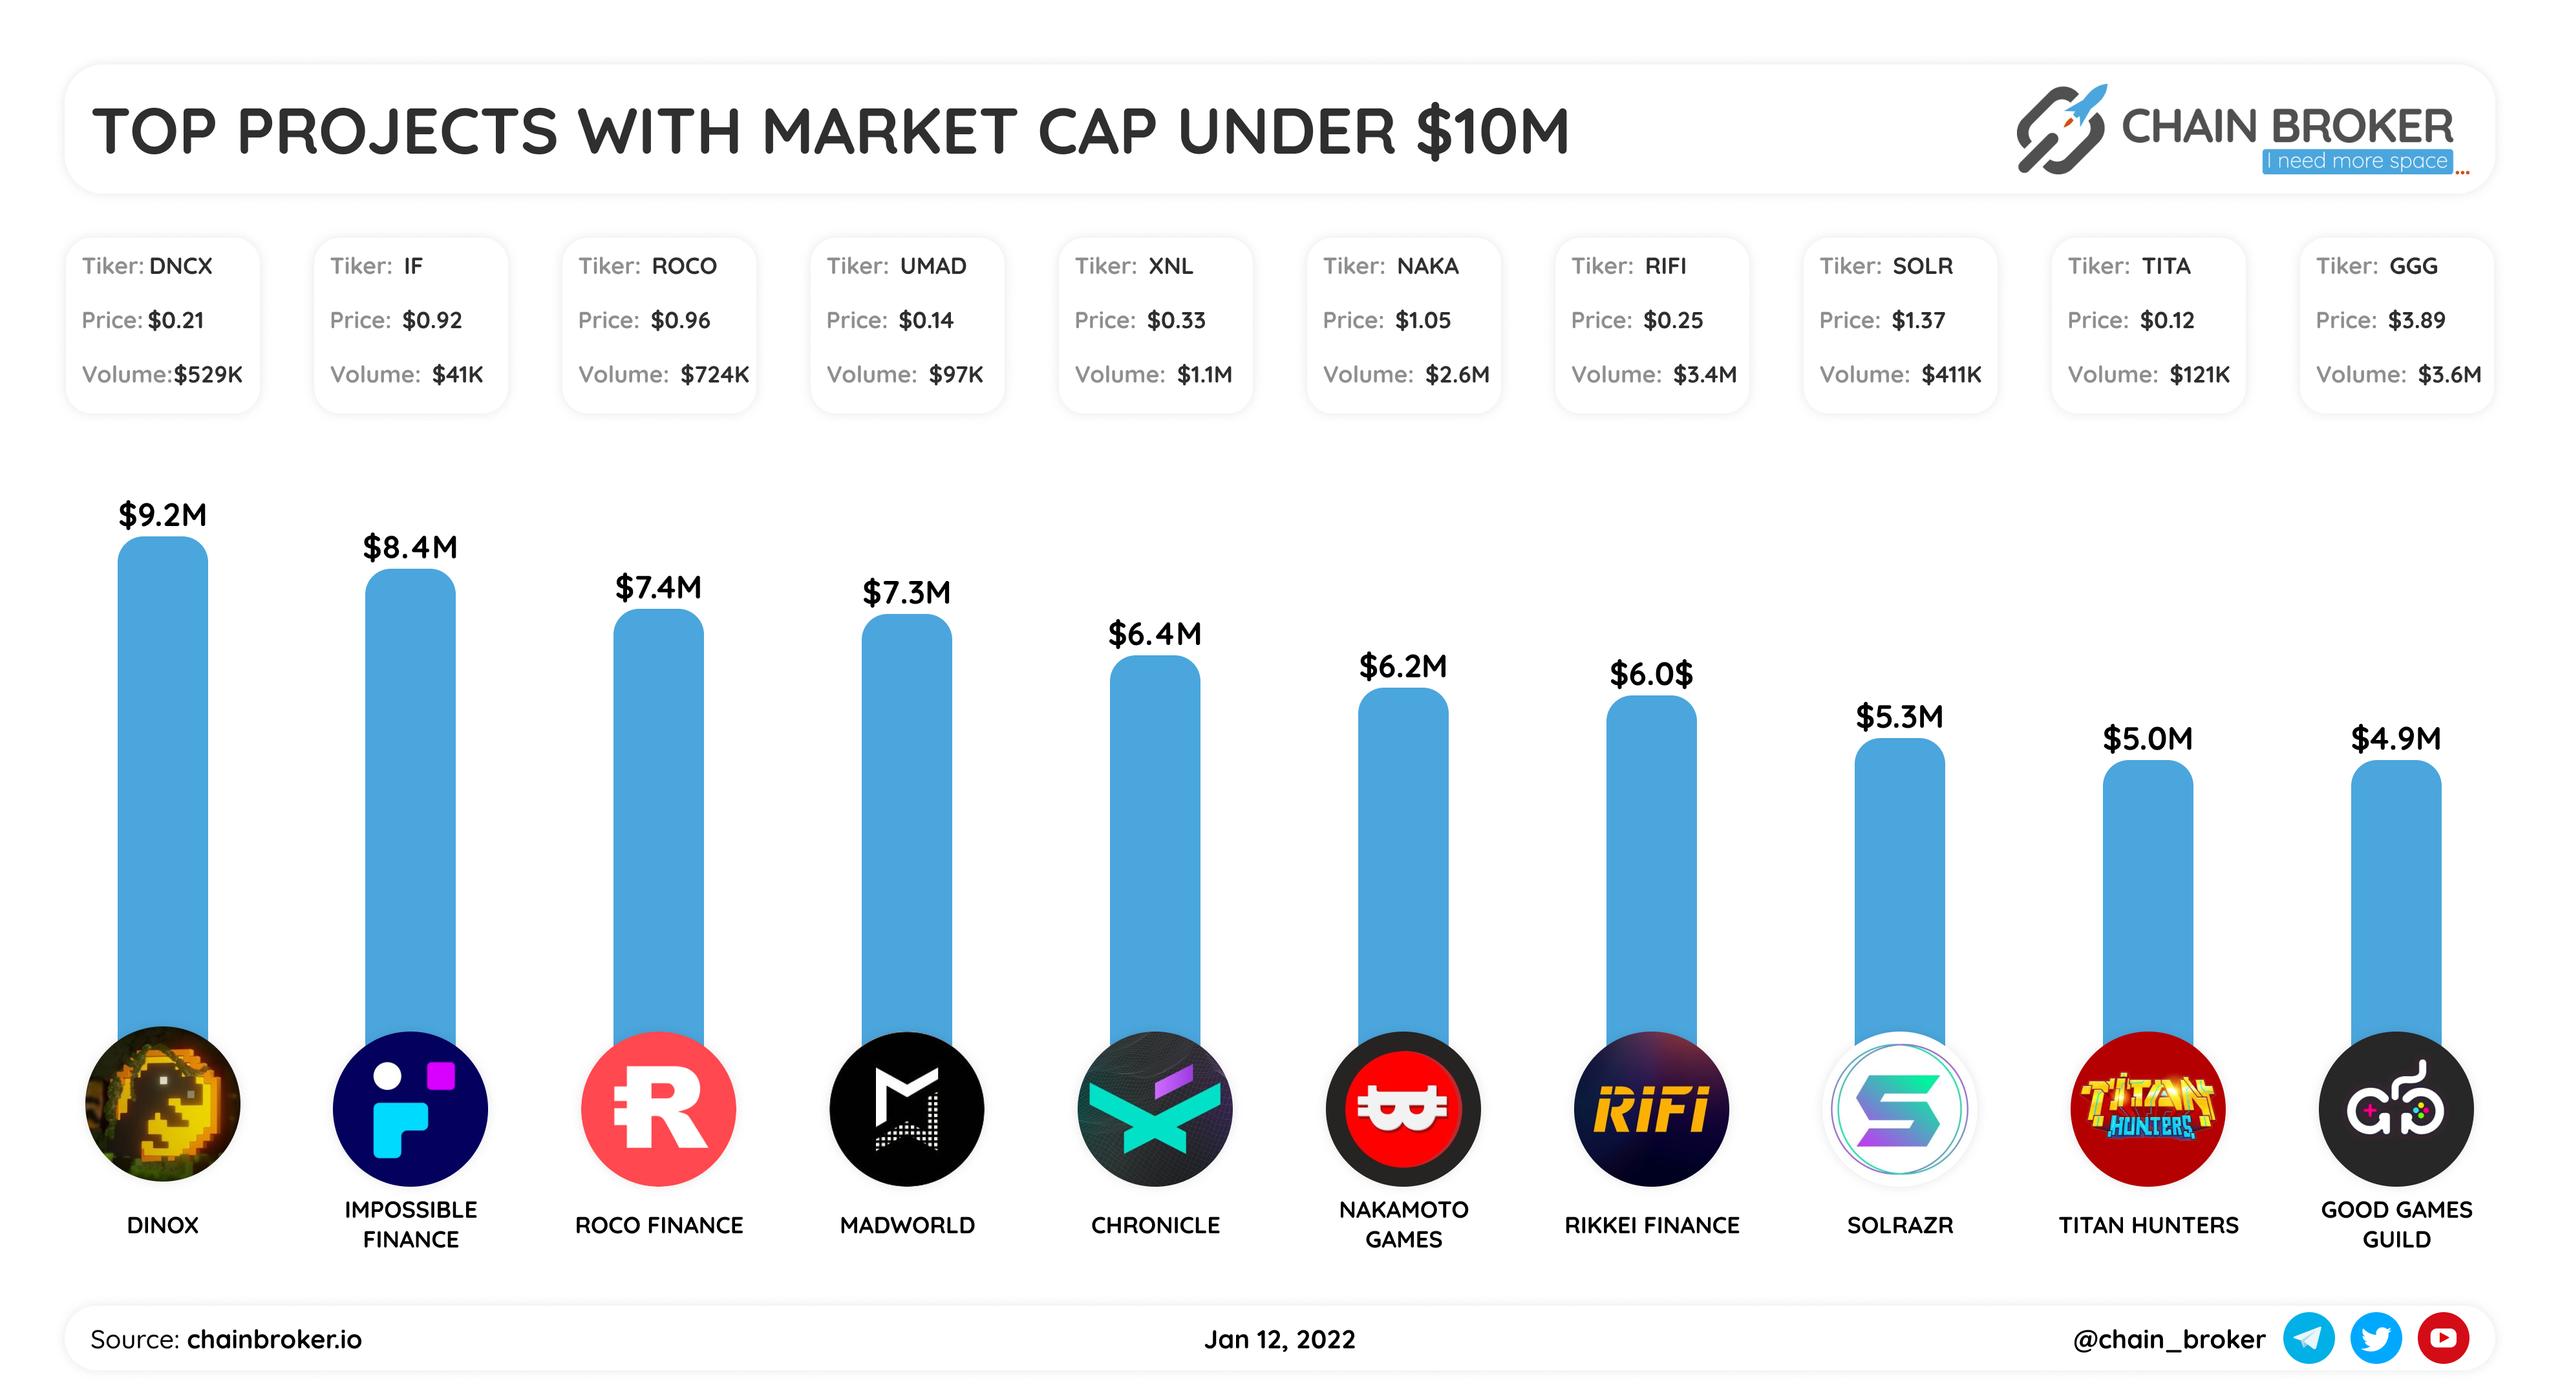 Top projects with market cap under $10M